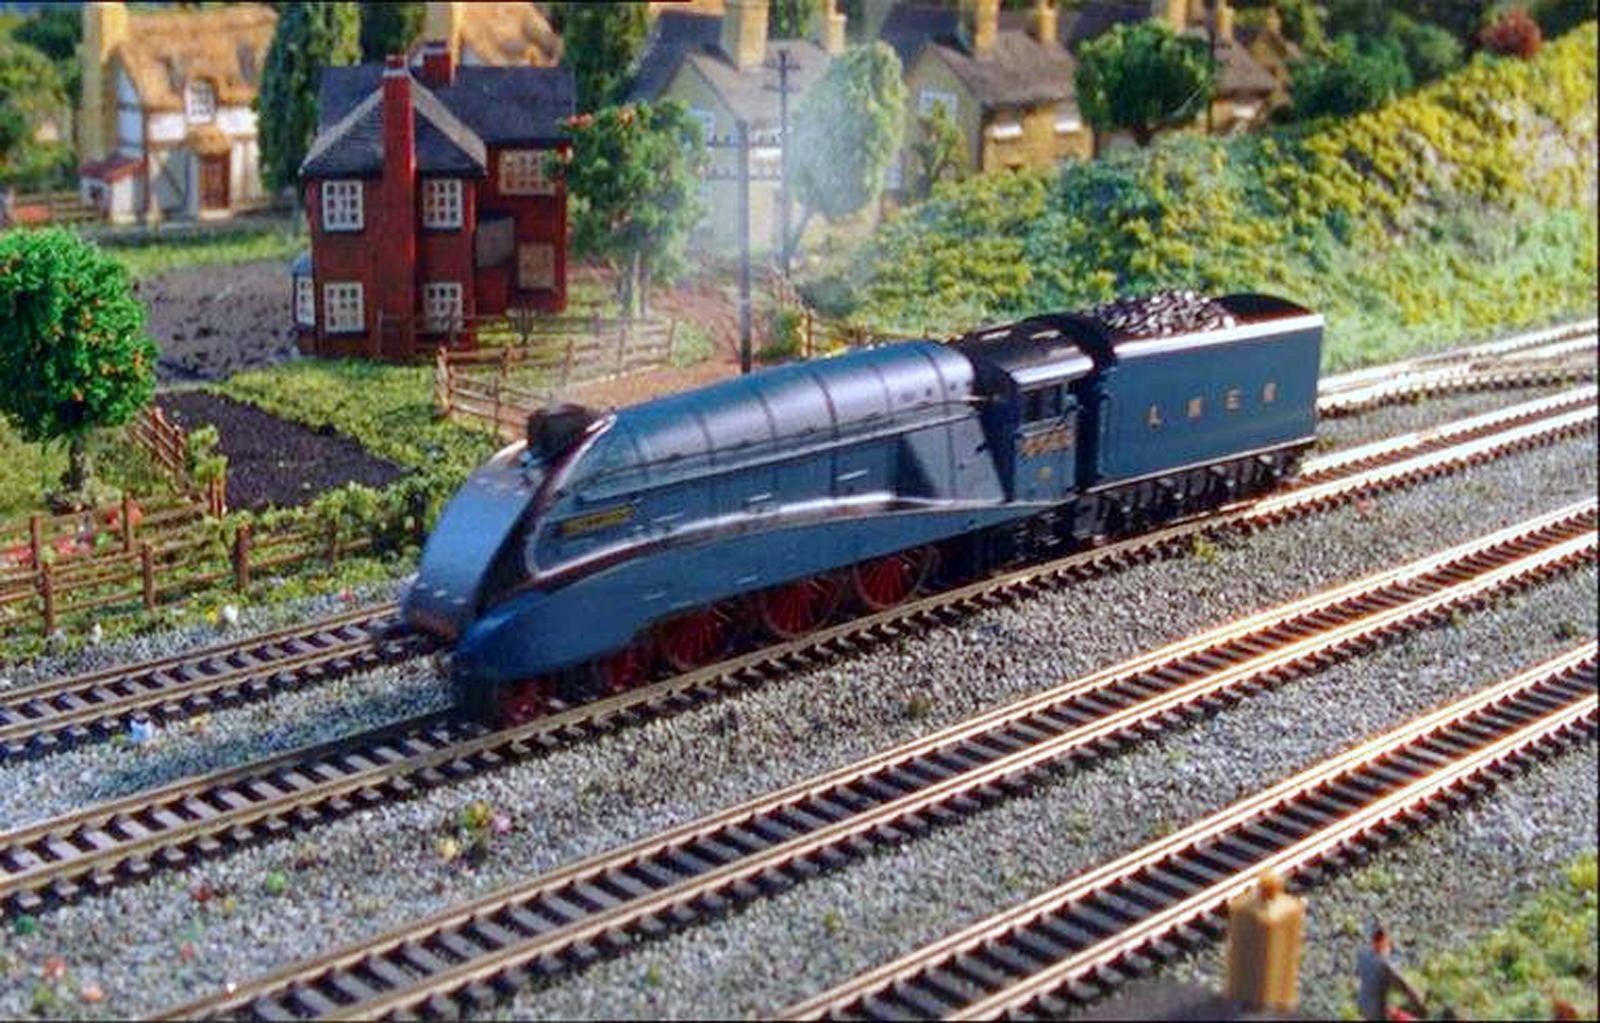 The Hornby ‘Live Steam Mallard’ range of model trains that are powered entirely by steam